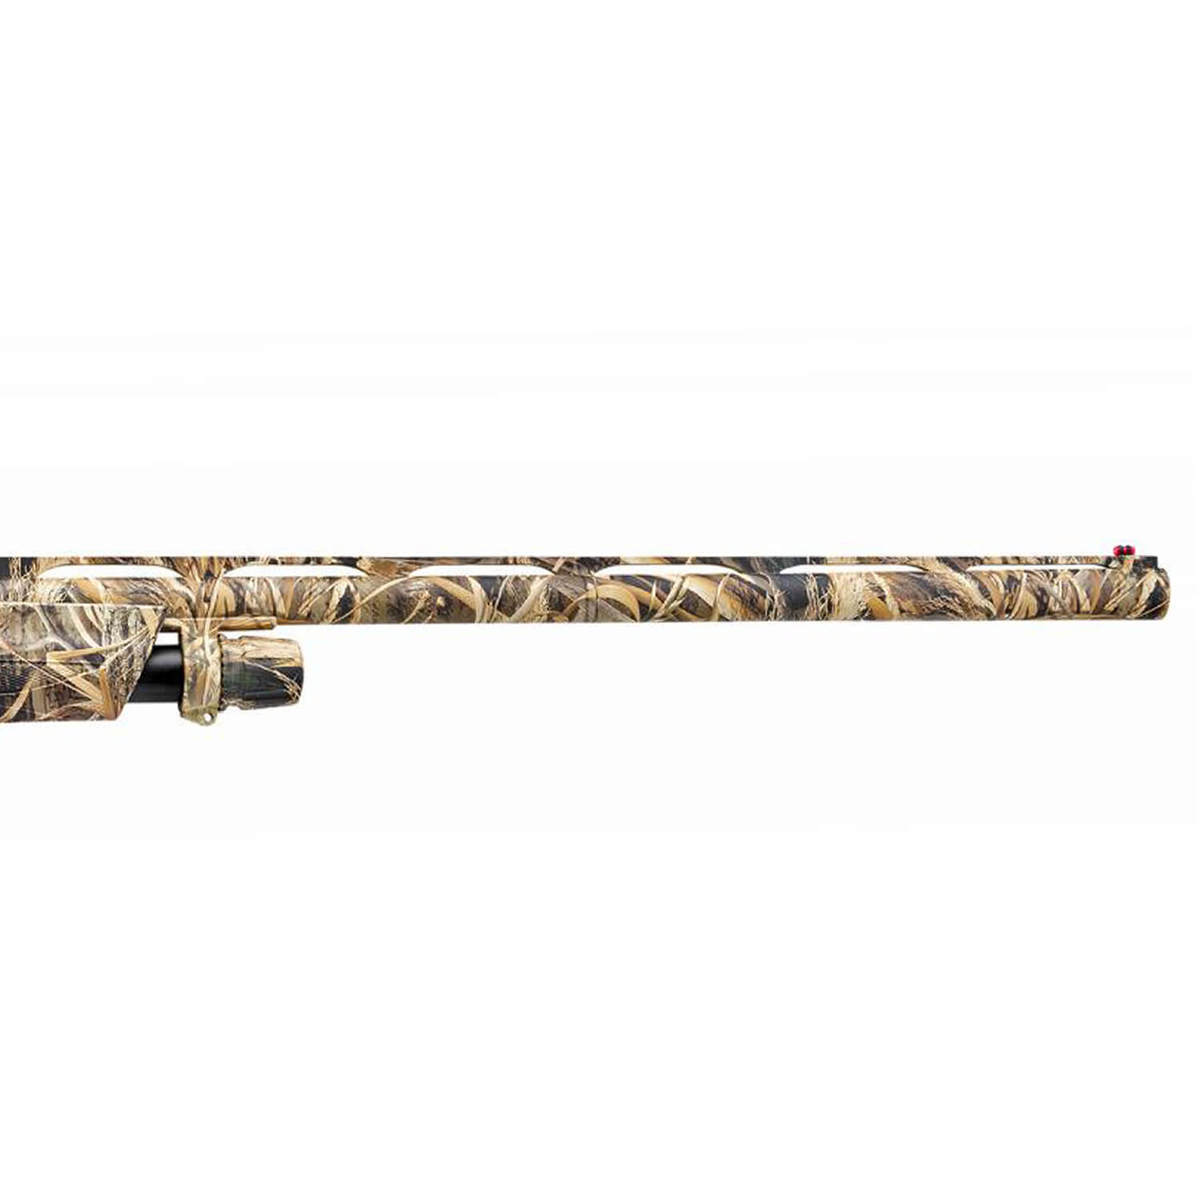 Stoeger P3000 Realtree Max 5 Camo 12 Gauge 2 3 4in 3in Pump Action Shotgun 26in Realtree Max 5 Camouflage Sportsman S Warehouse - m2300 357 magnum roblox